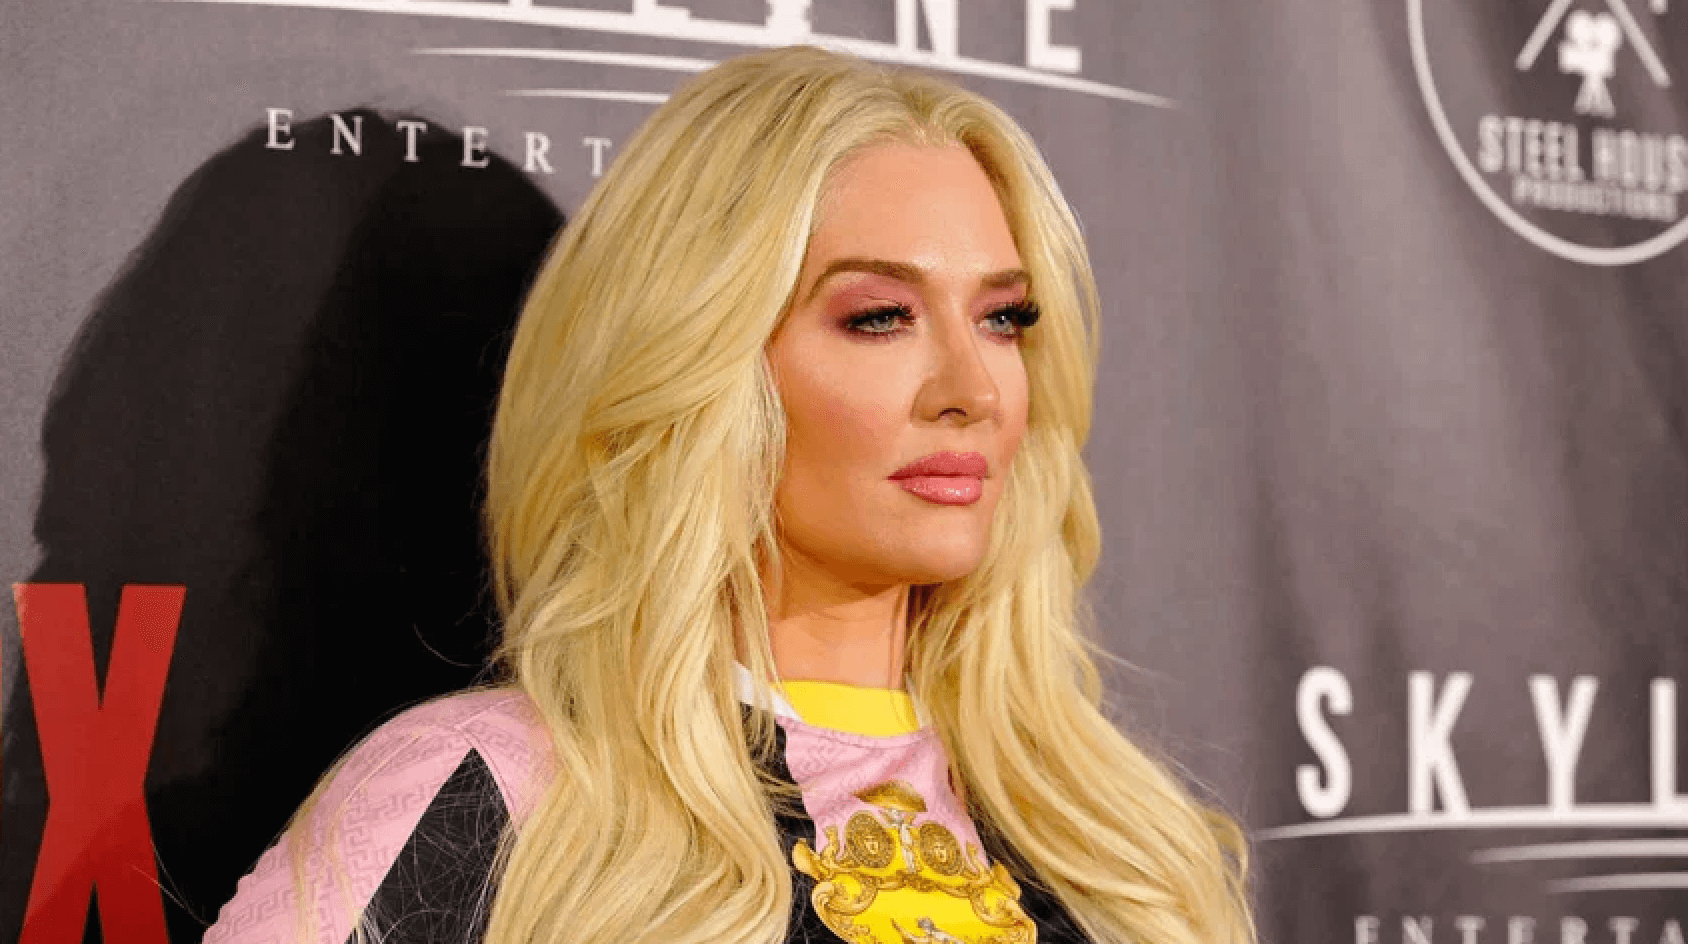 Erika Jayne Gearing Up To Fight Lawyer Demanding She Repay Loans Received From Ex Tom Girardi!